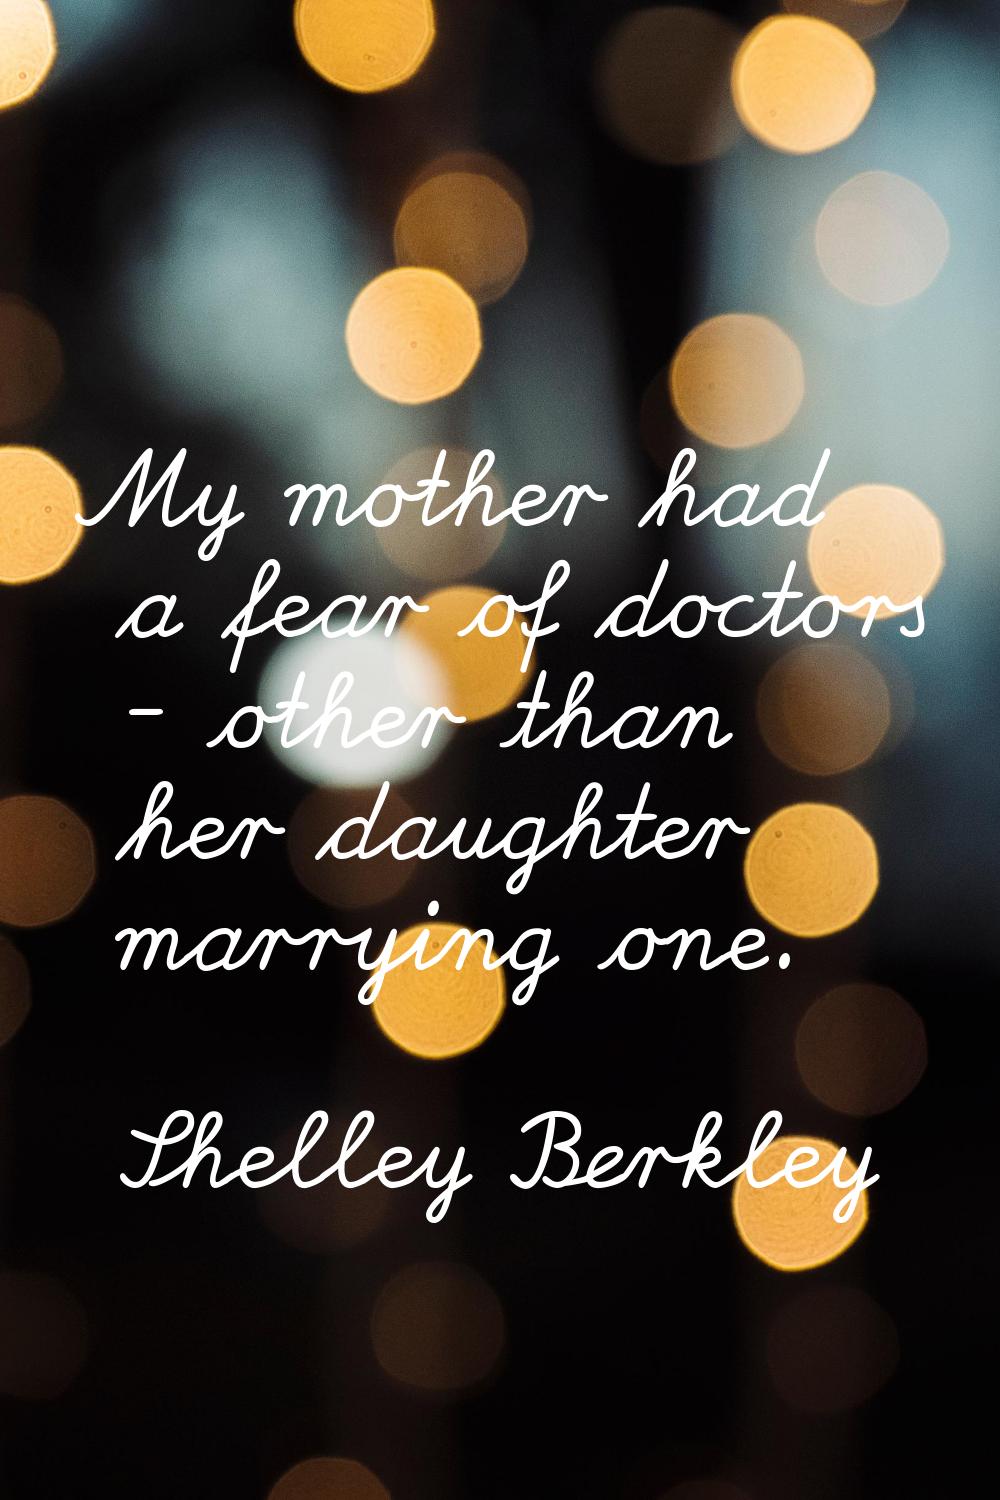 My mother had a fear of doctors - other than her daughter marrying one.